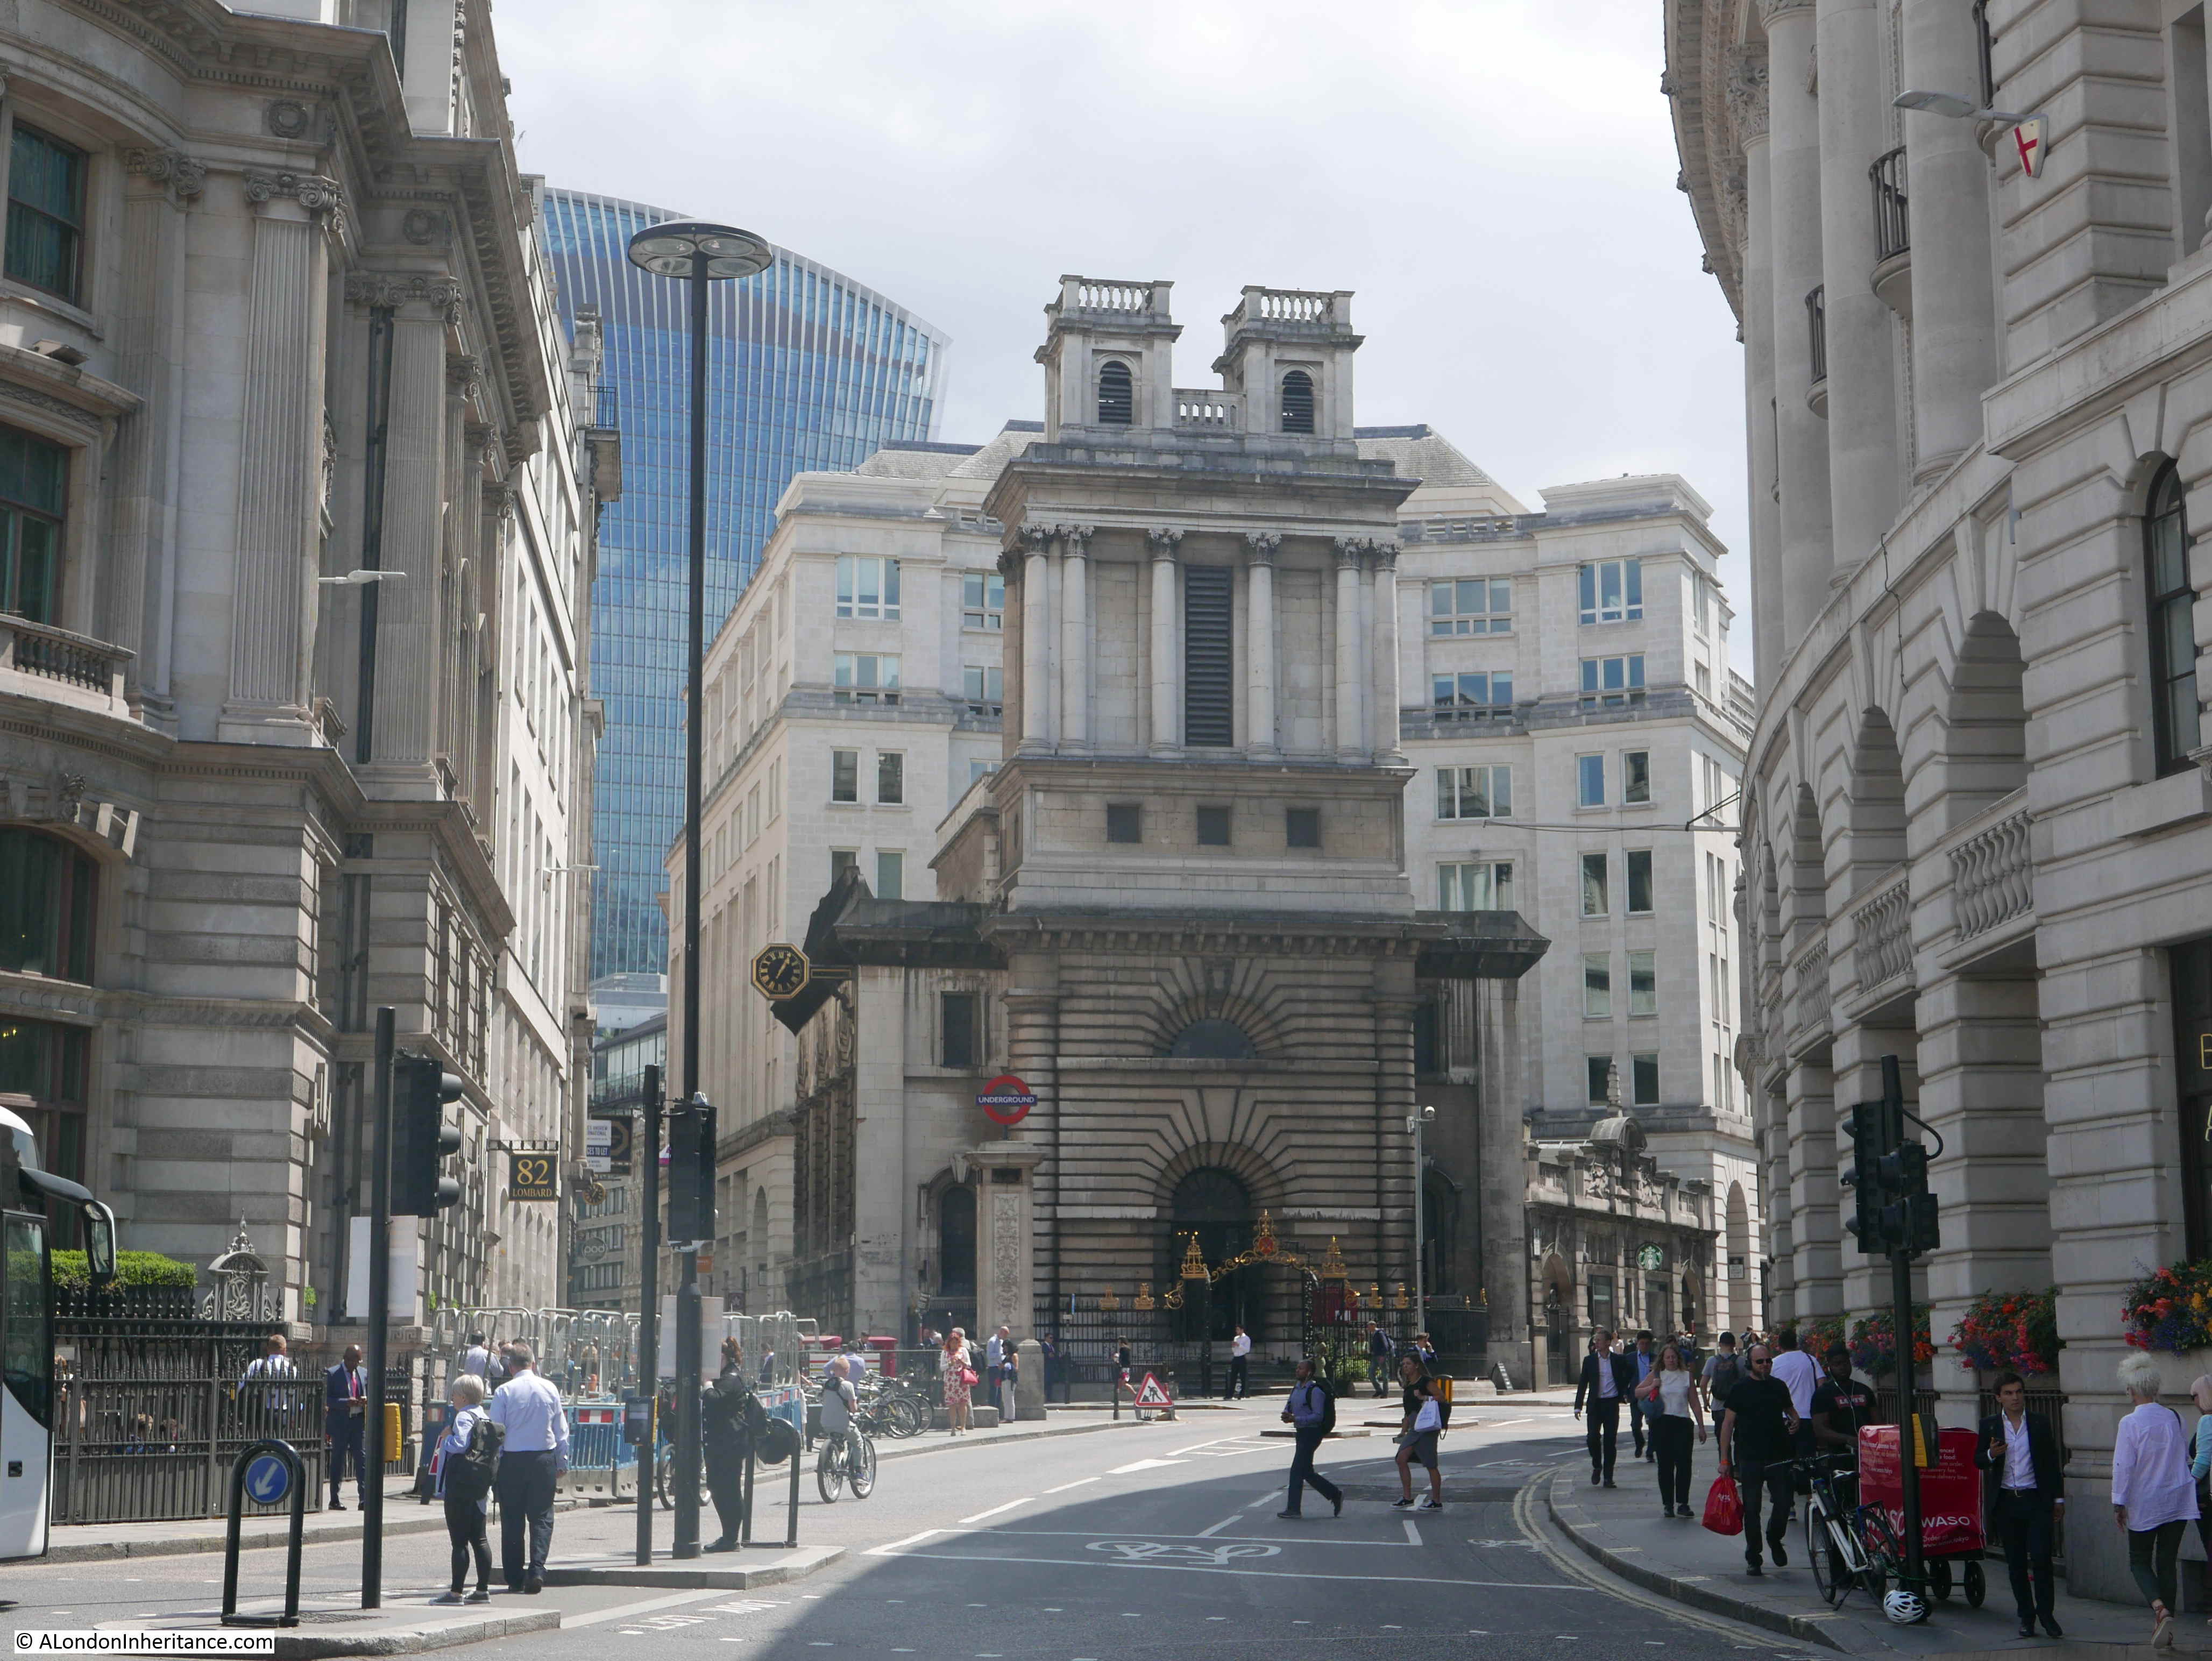 St Mary Woolnoth - The Church With The Underground In The Crypt - A London Inheritance